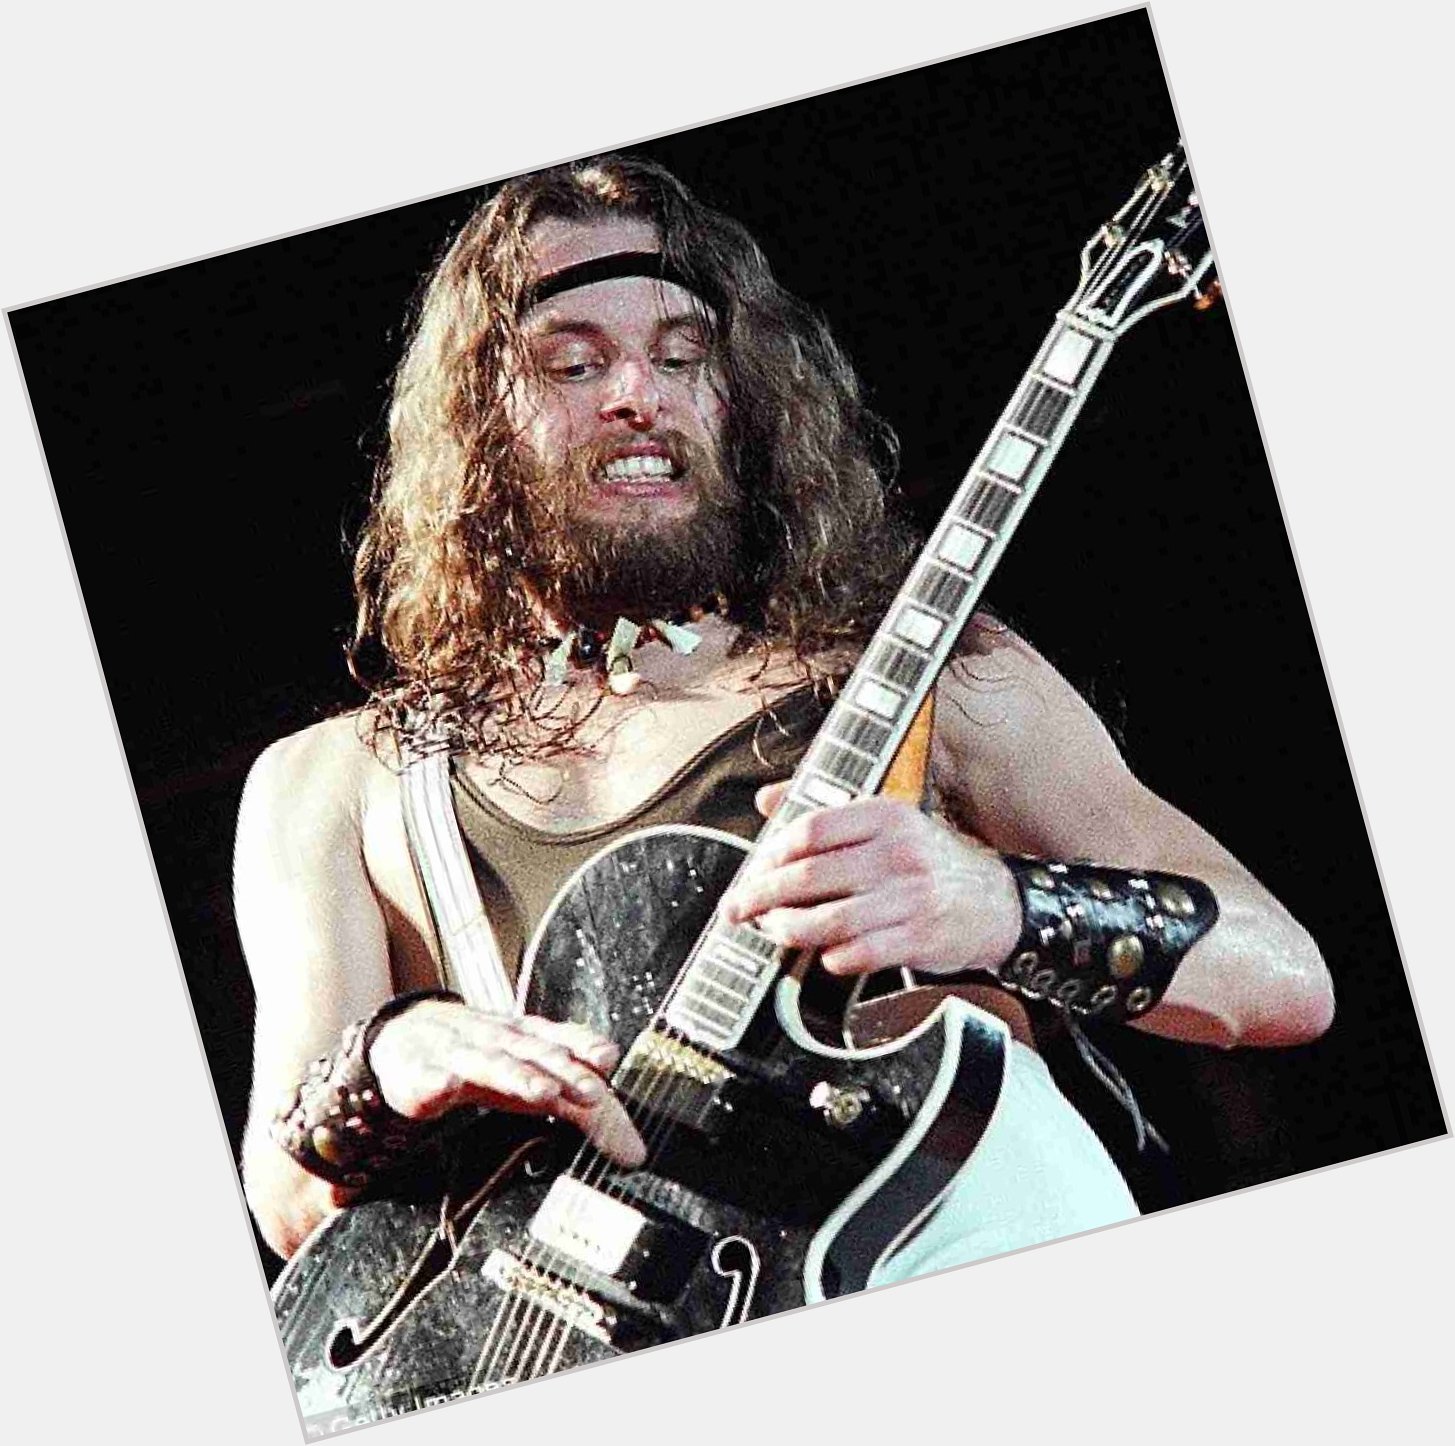  Happy birthday to \the motor city madman\ and great American patriot Ted Nugent. 